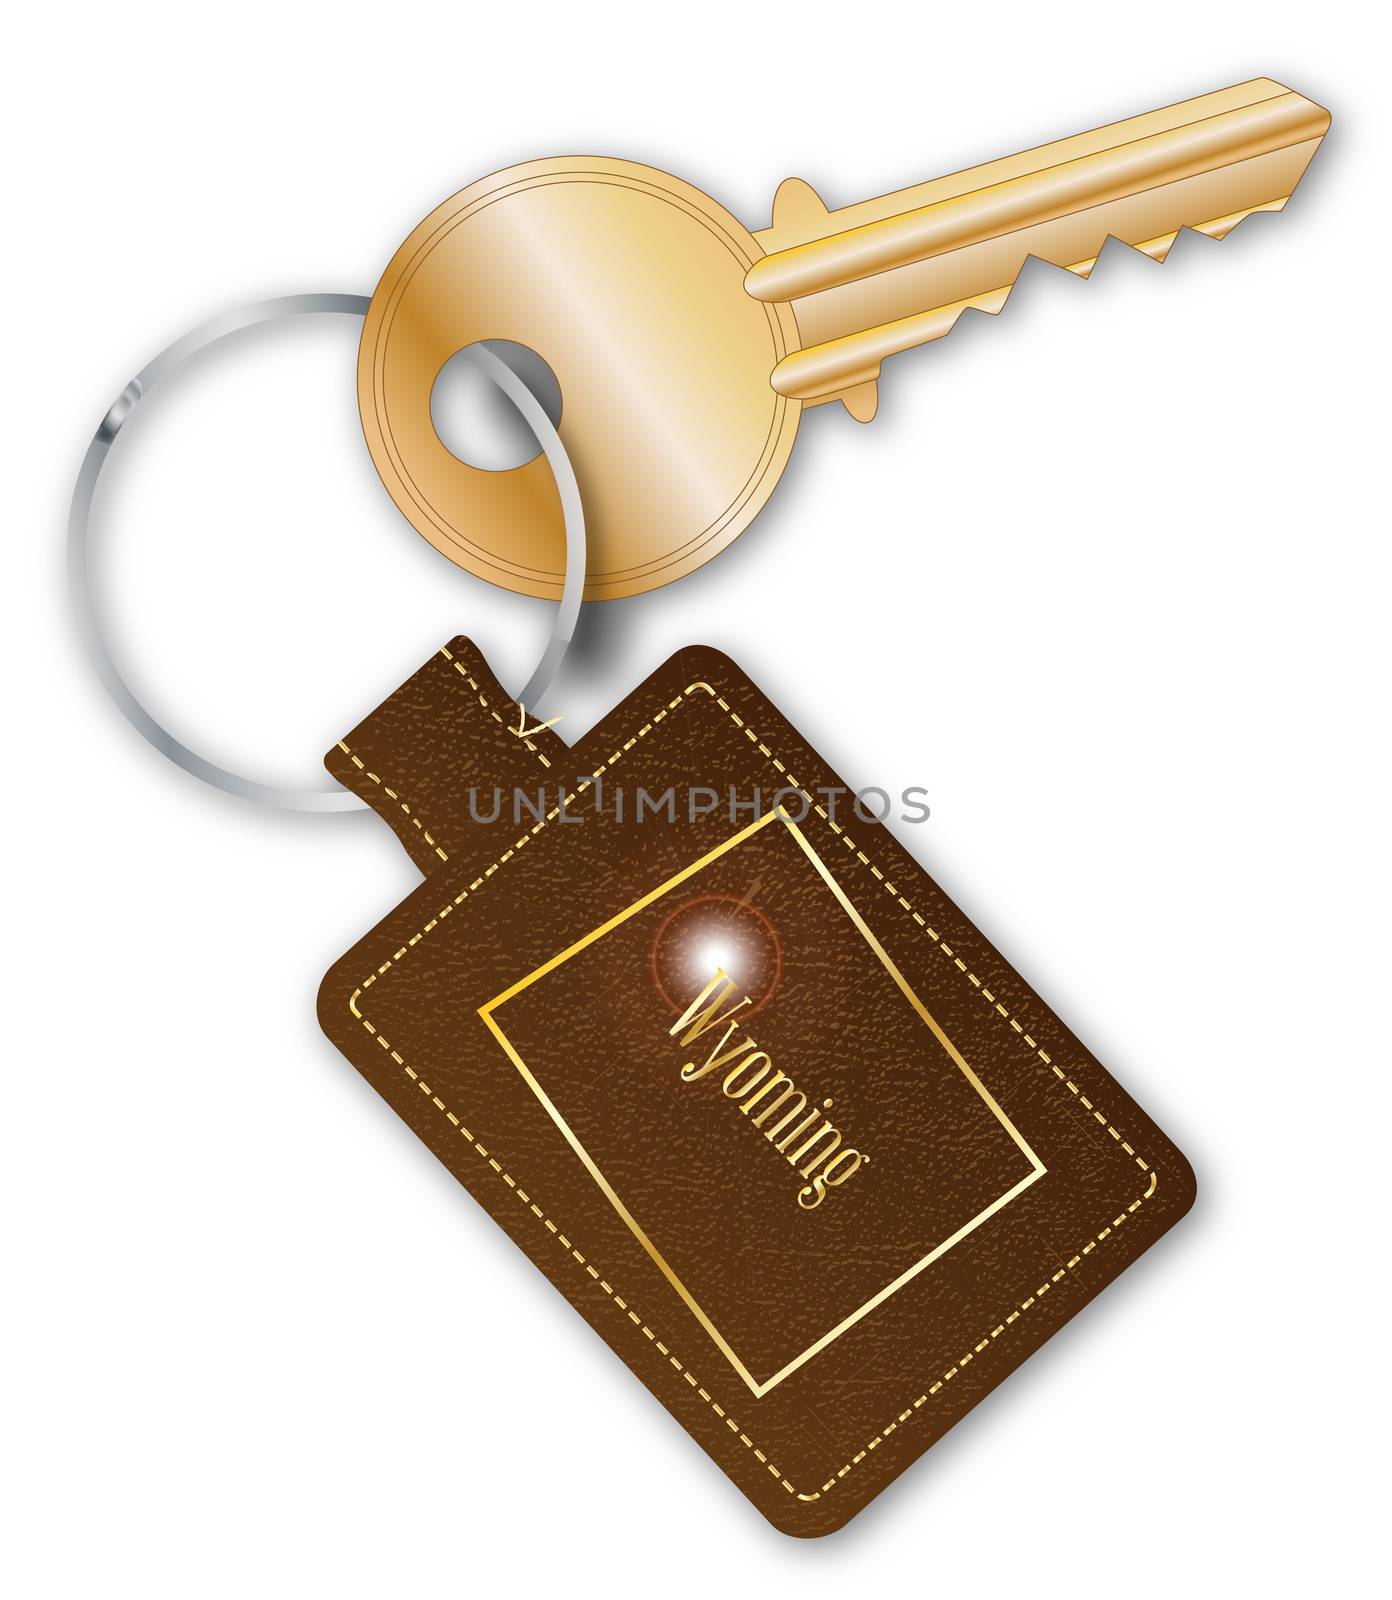 A brown leather key fob and ring with a brass latch key with the text Wyoming